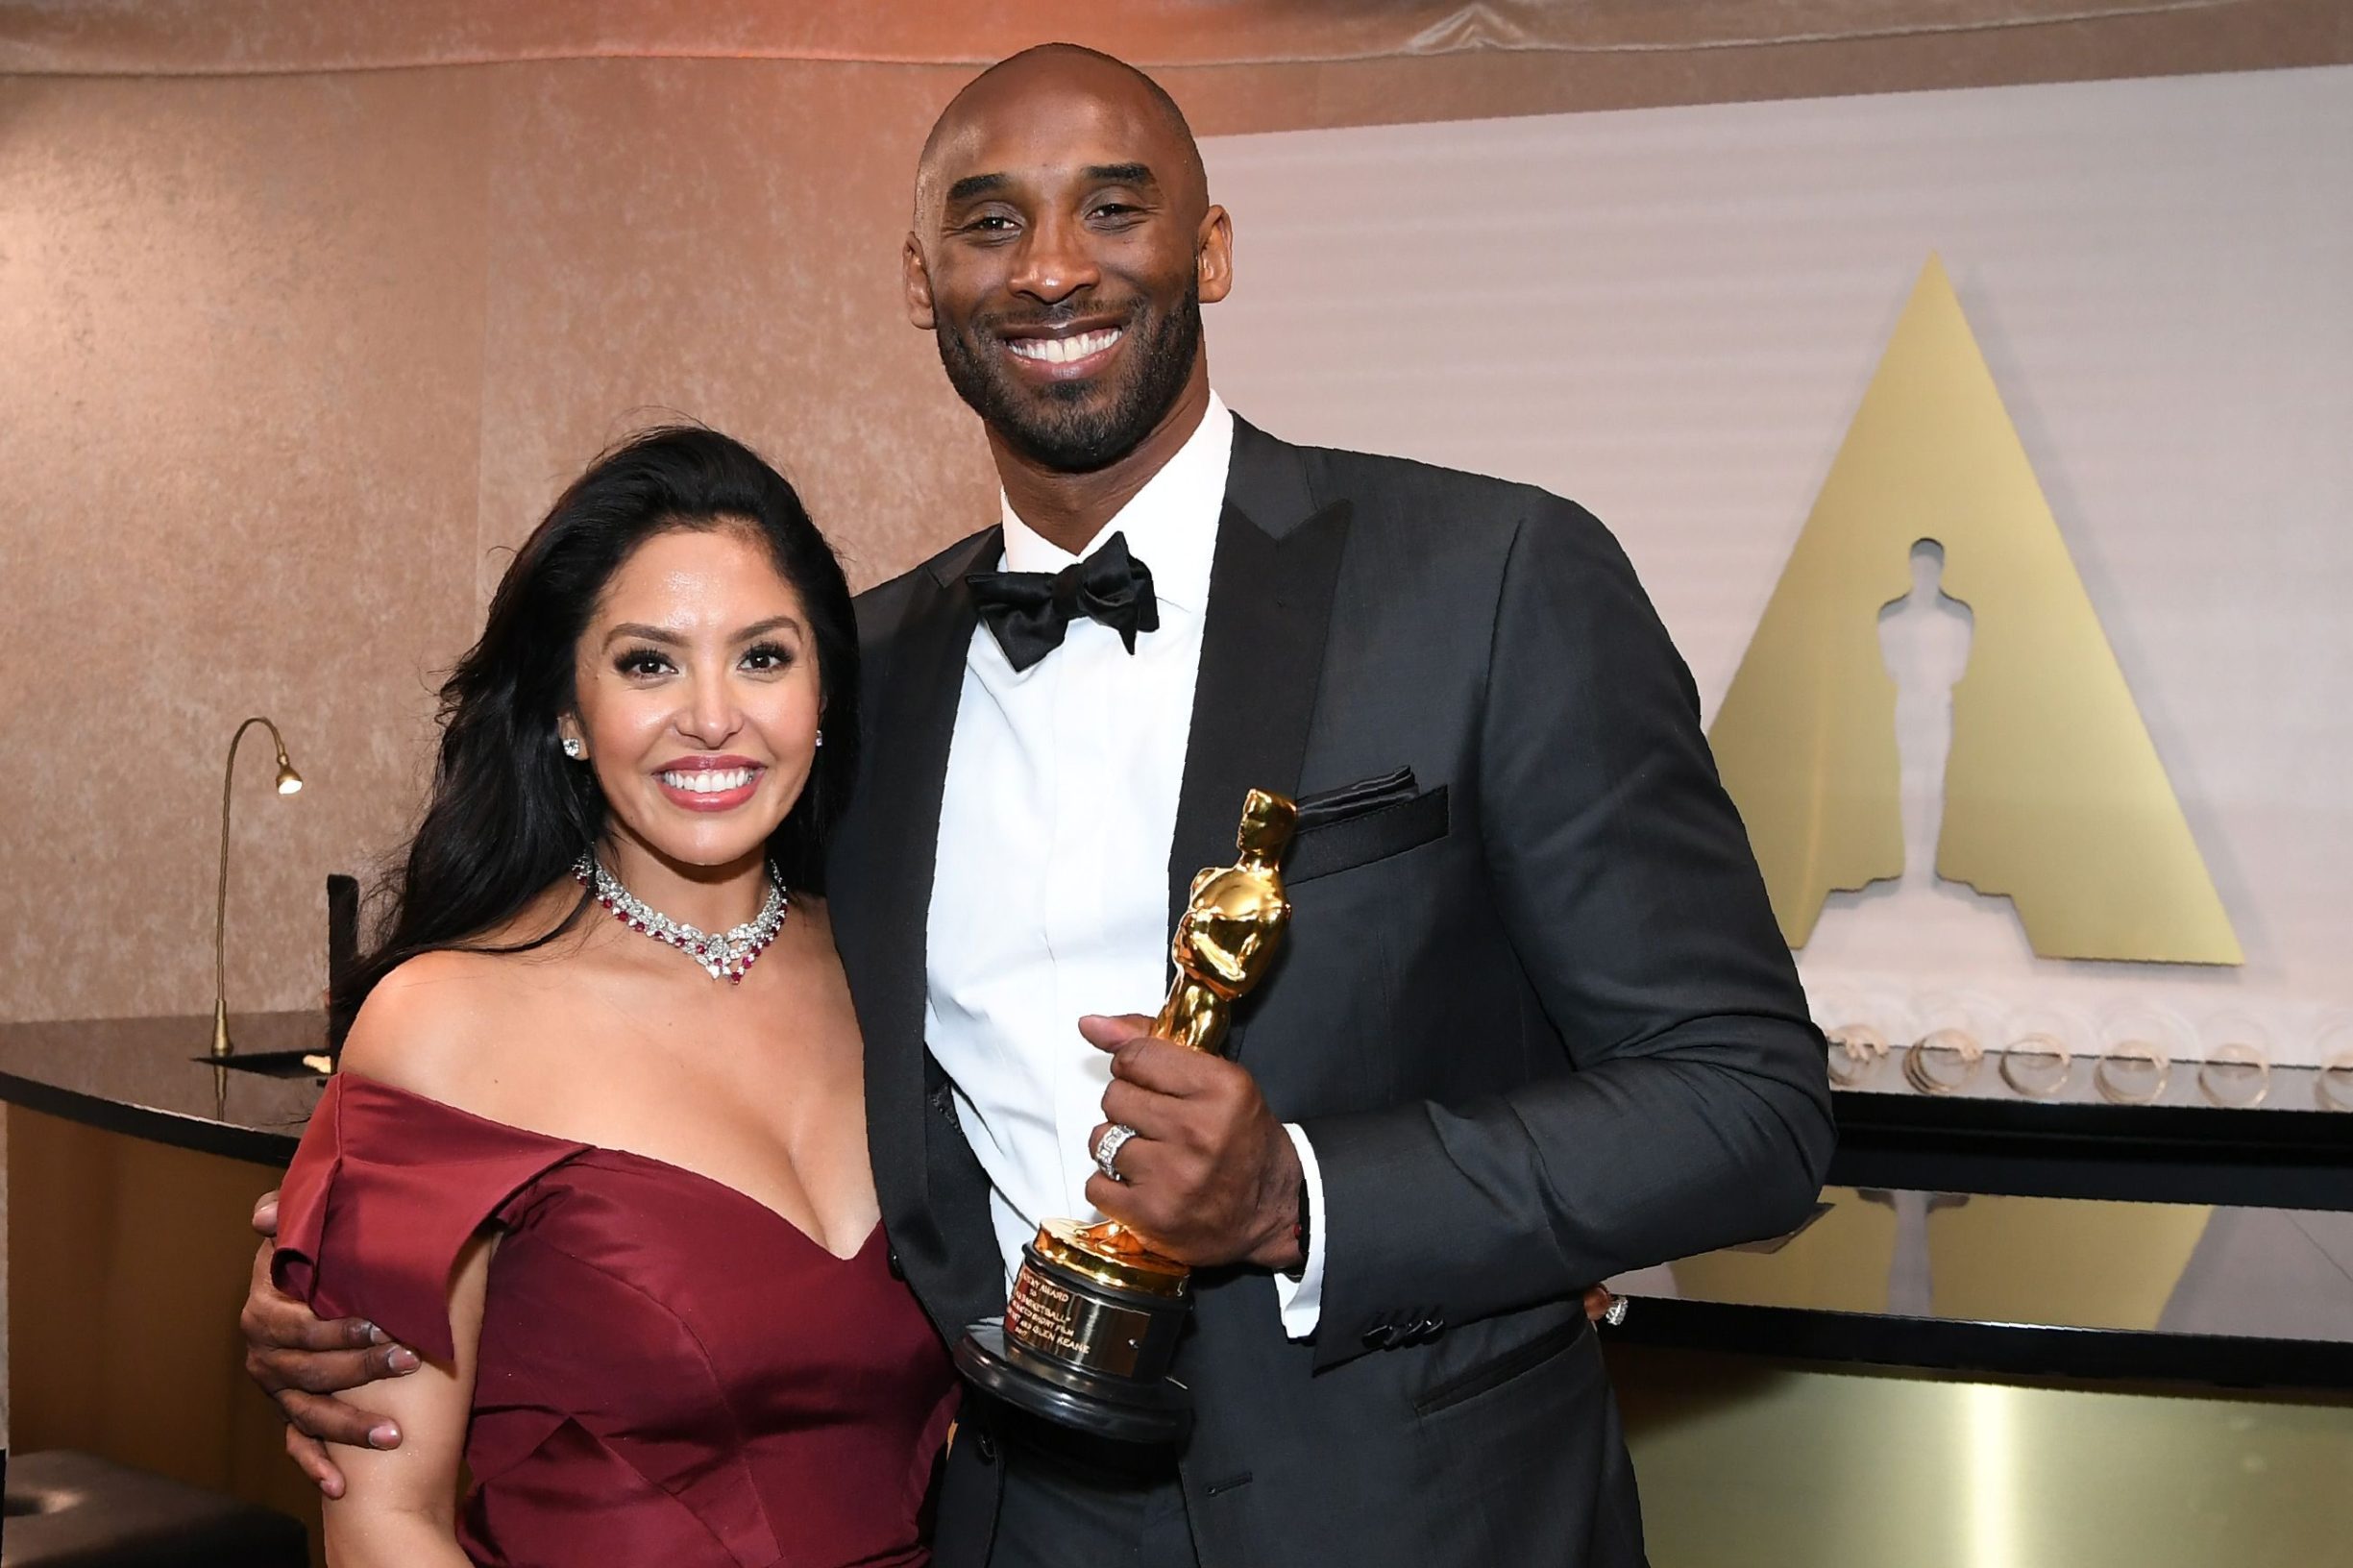 (FILES) In this file photo taken on March 04, 2018 US actor and basketball player Kobe Bryant anf his wife Vanessa Laine Bryant attend the 90th Annual Academy Awards Governors Ball at the Hollywood & Highland Center in Hollywood, California. - NBA legend Kobe Bryant died Sunday when a helicopter crashed and burst into flames in foggy conditions in suburban Los Angeles, killing all nine people on board and plunging the sports world into mourning. (Photo by ANGELA WEISS / AFP)